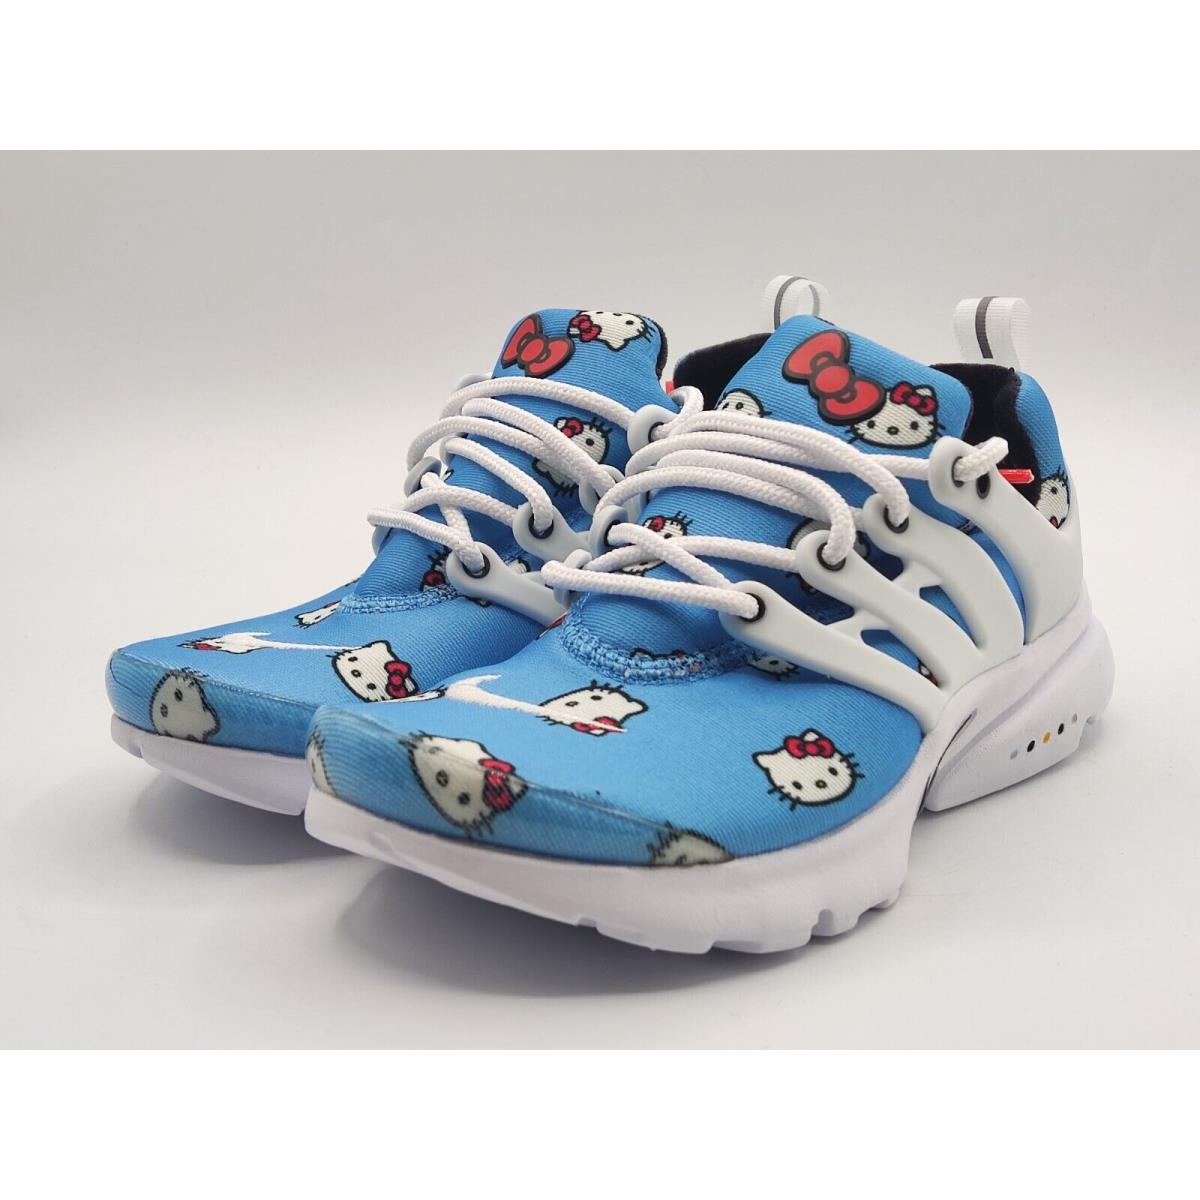 Nike Presto x Hello Kitty Kids Shoes DH7780-402 PS Sz 2Y Sneakers In H